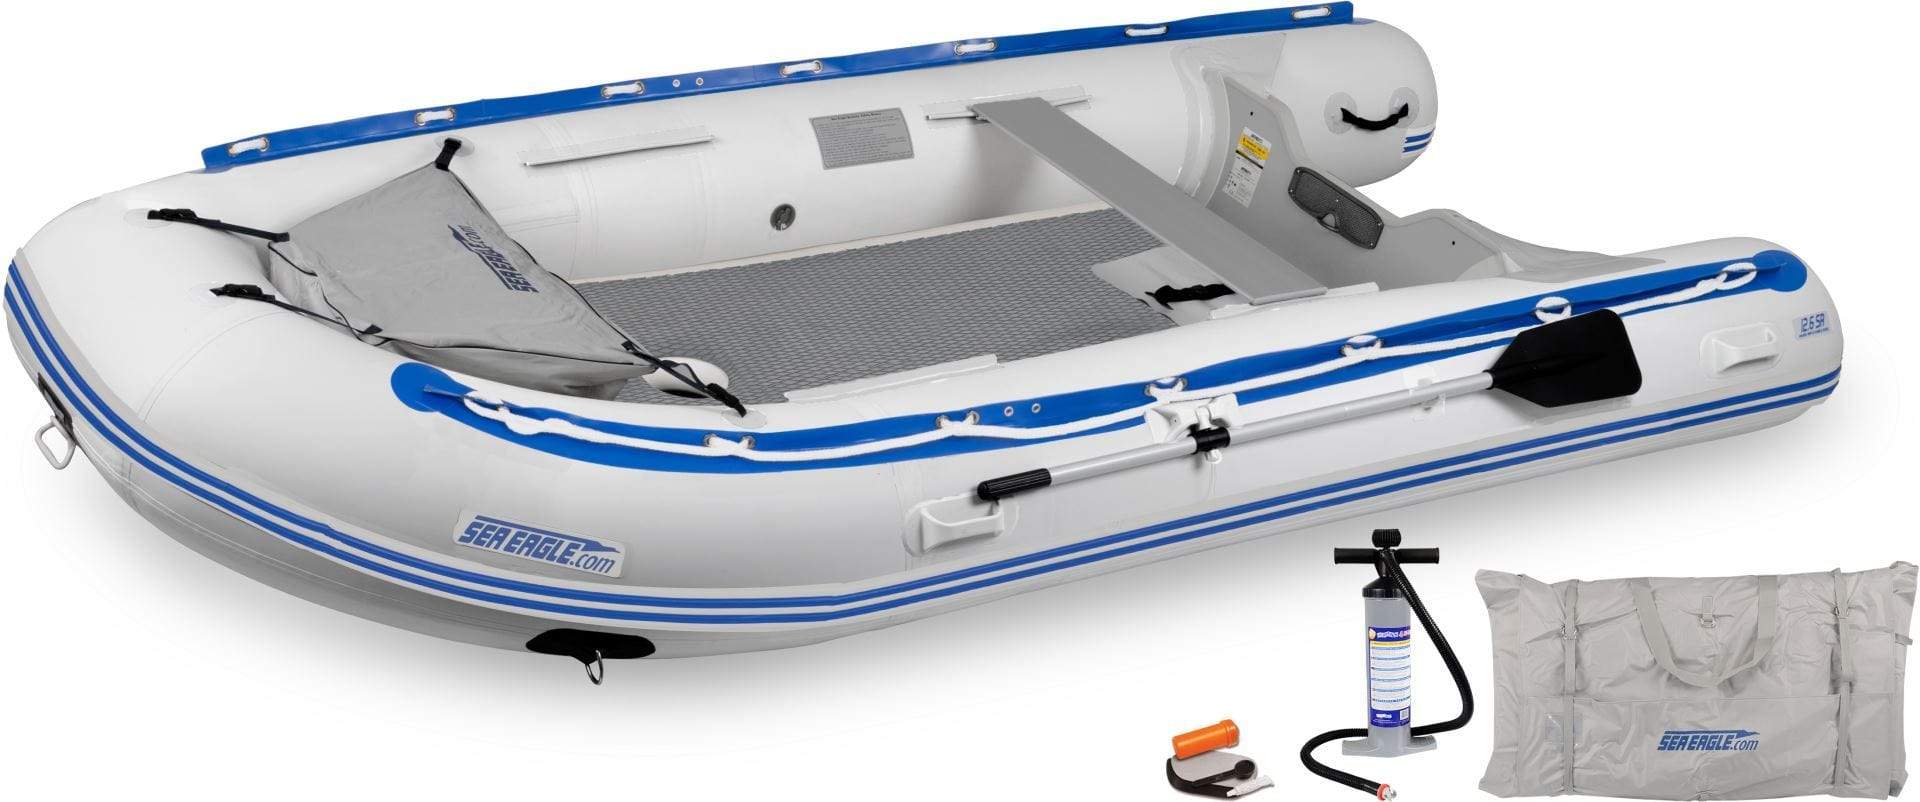 SeaEagle Transom Boat Packages Bench / Dropstitch Sea Eagle - 126SR 6 Person 12'6" White/Blue Sport Runabout Inflatable DSFloor Deluxe Boat ( 126SRXX )